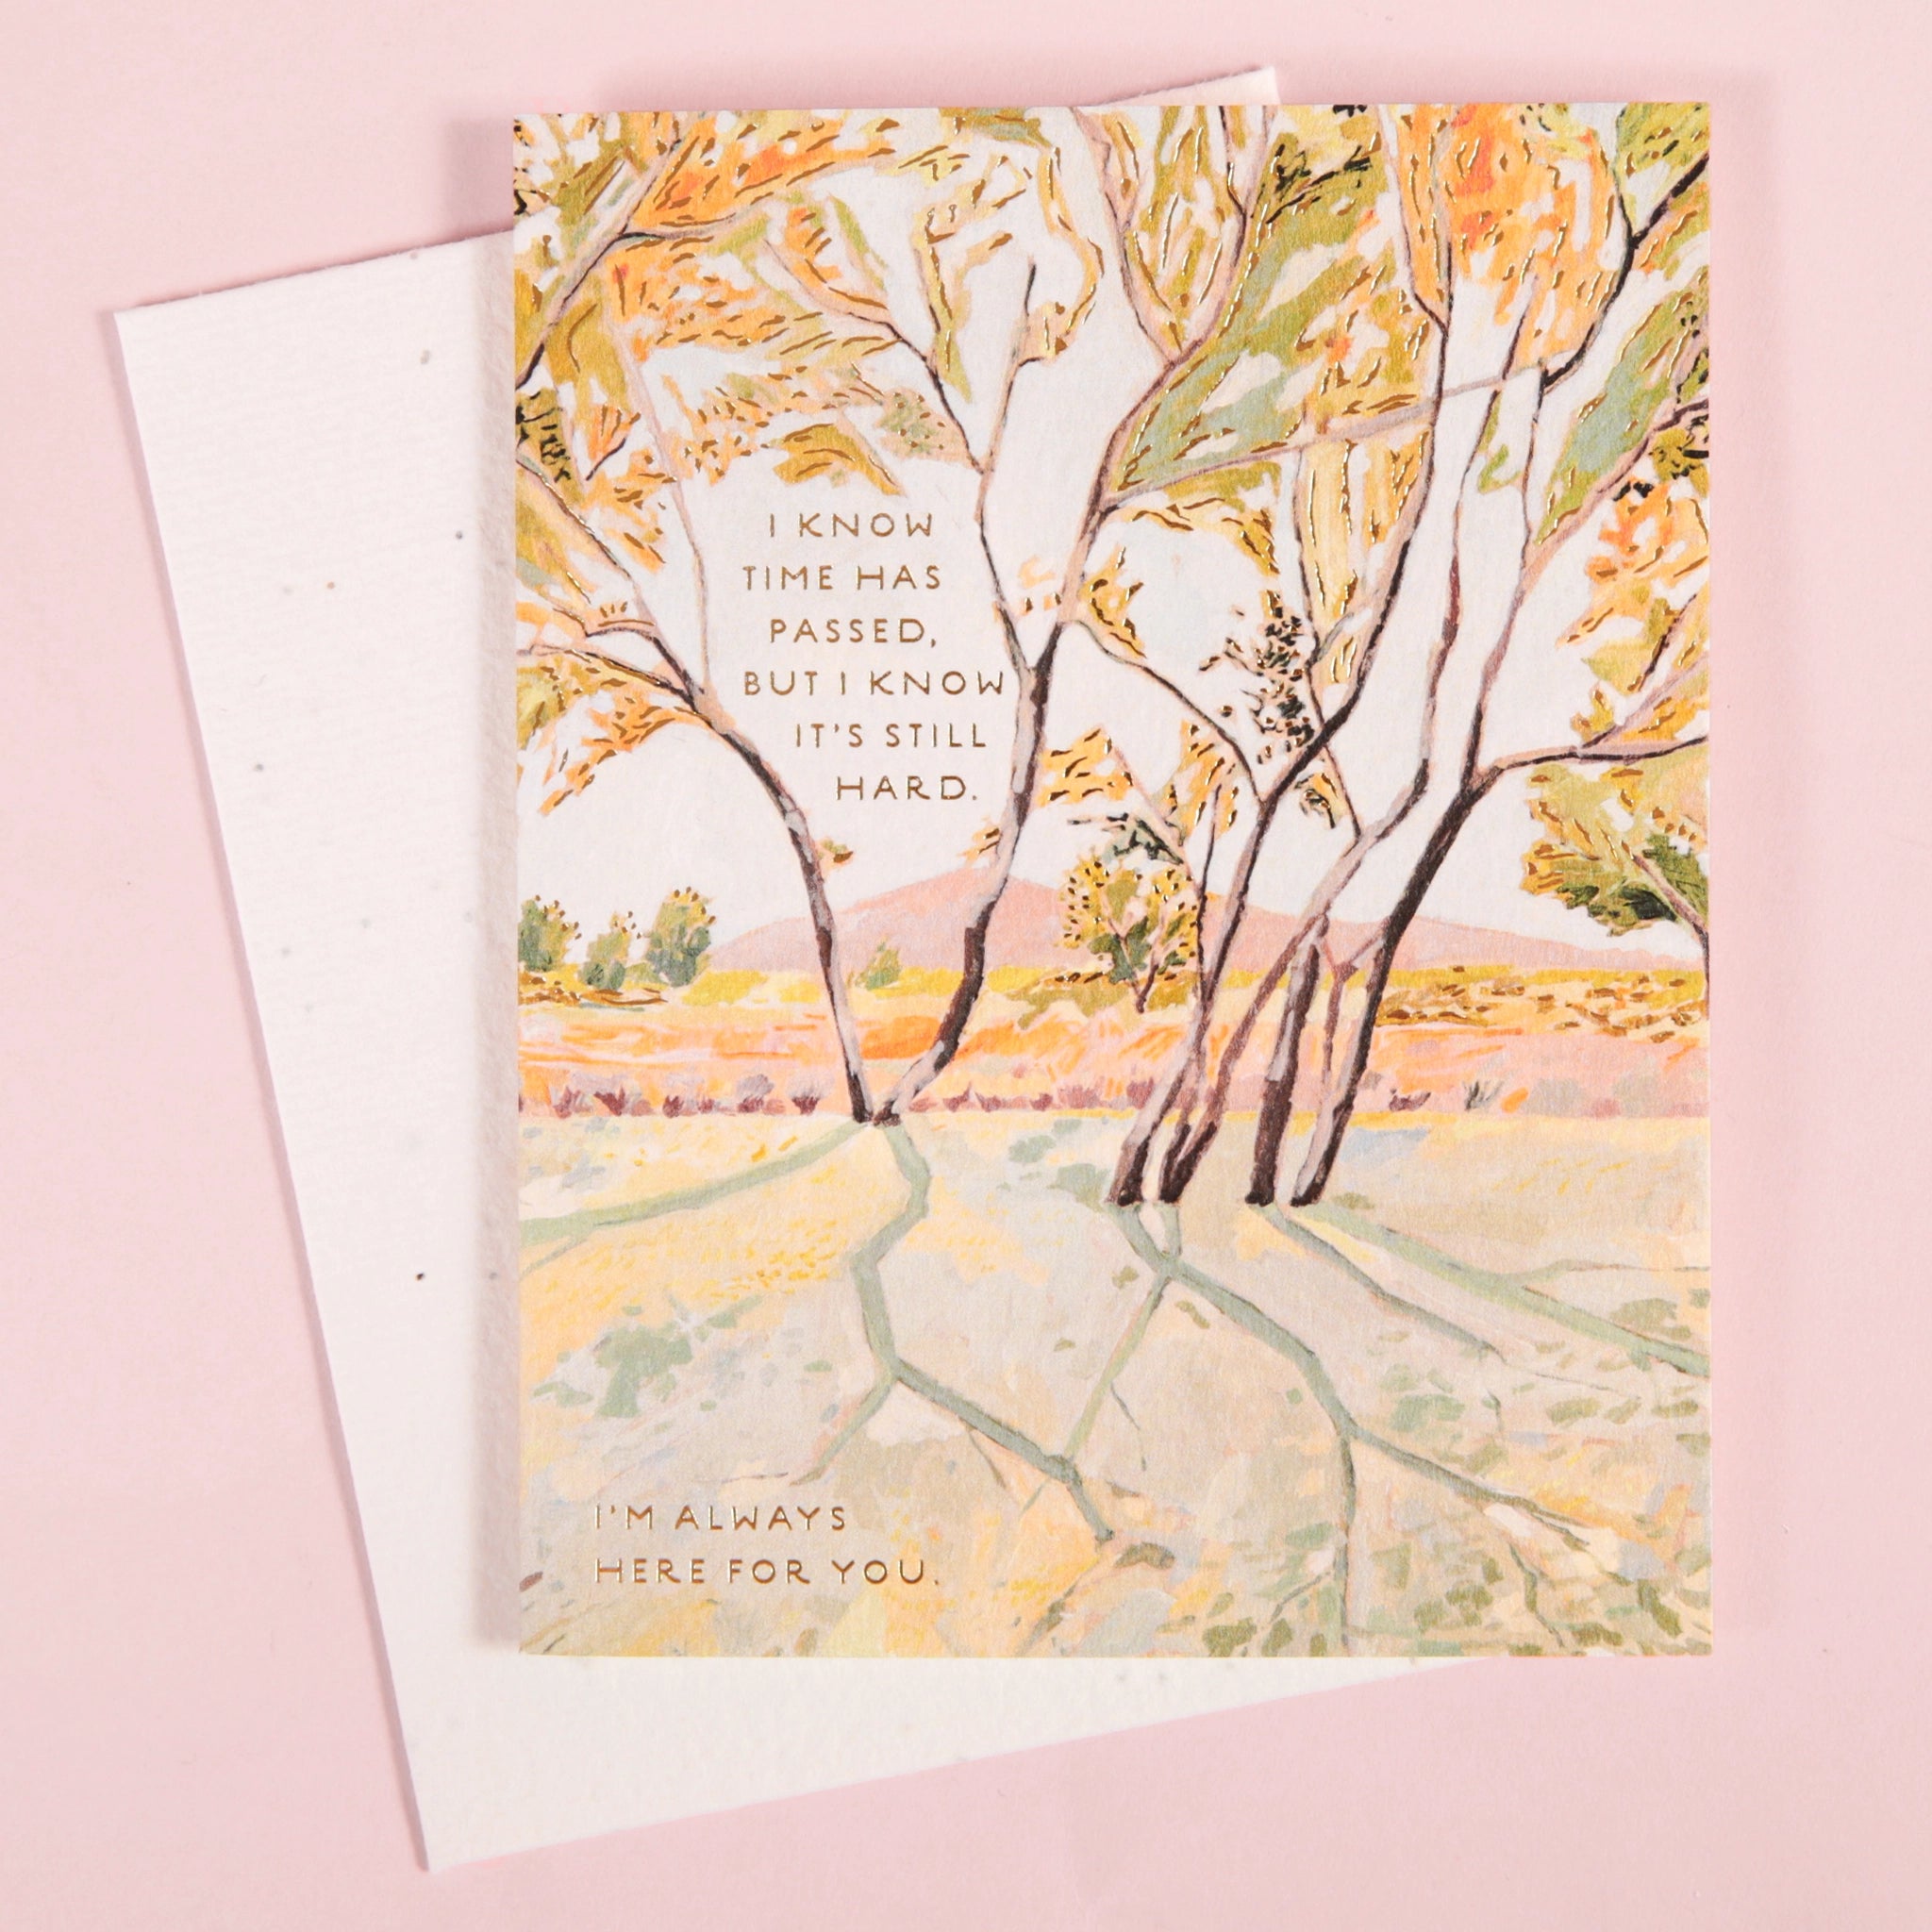 On a light pink background is a white envelope and card with a yellow and light green illustration of trees in a park with text that reads, "I know time has passed, but I know it's still hard. I'm always here for you".